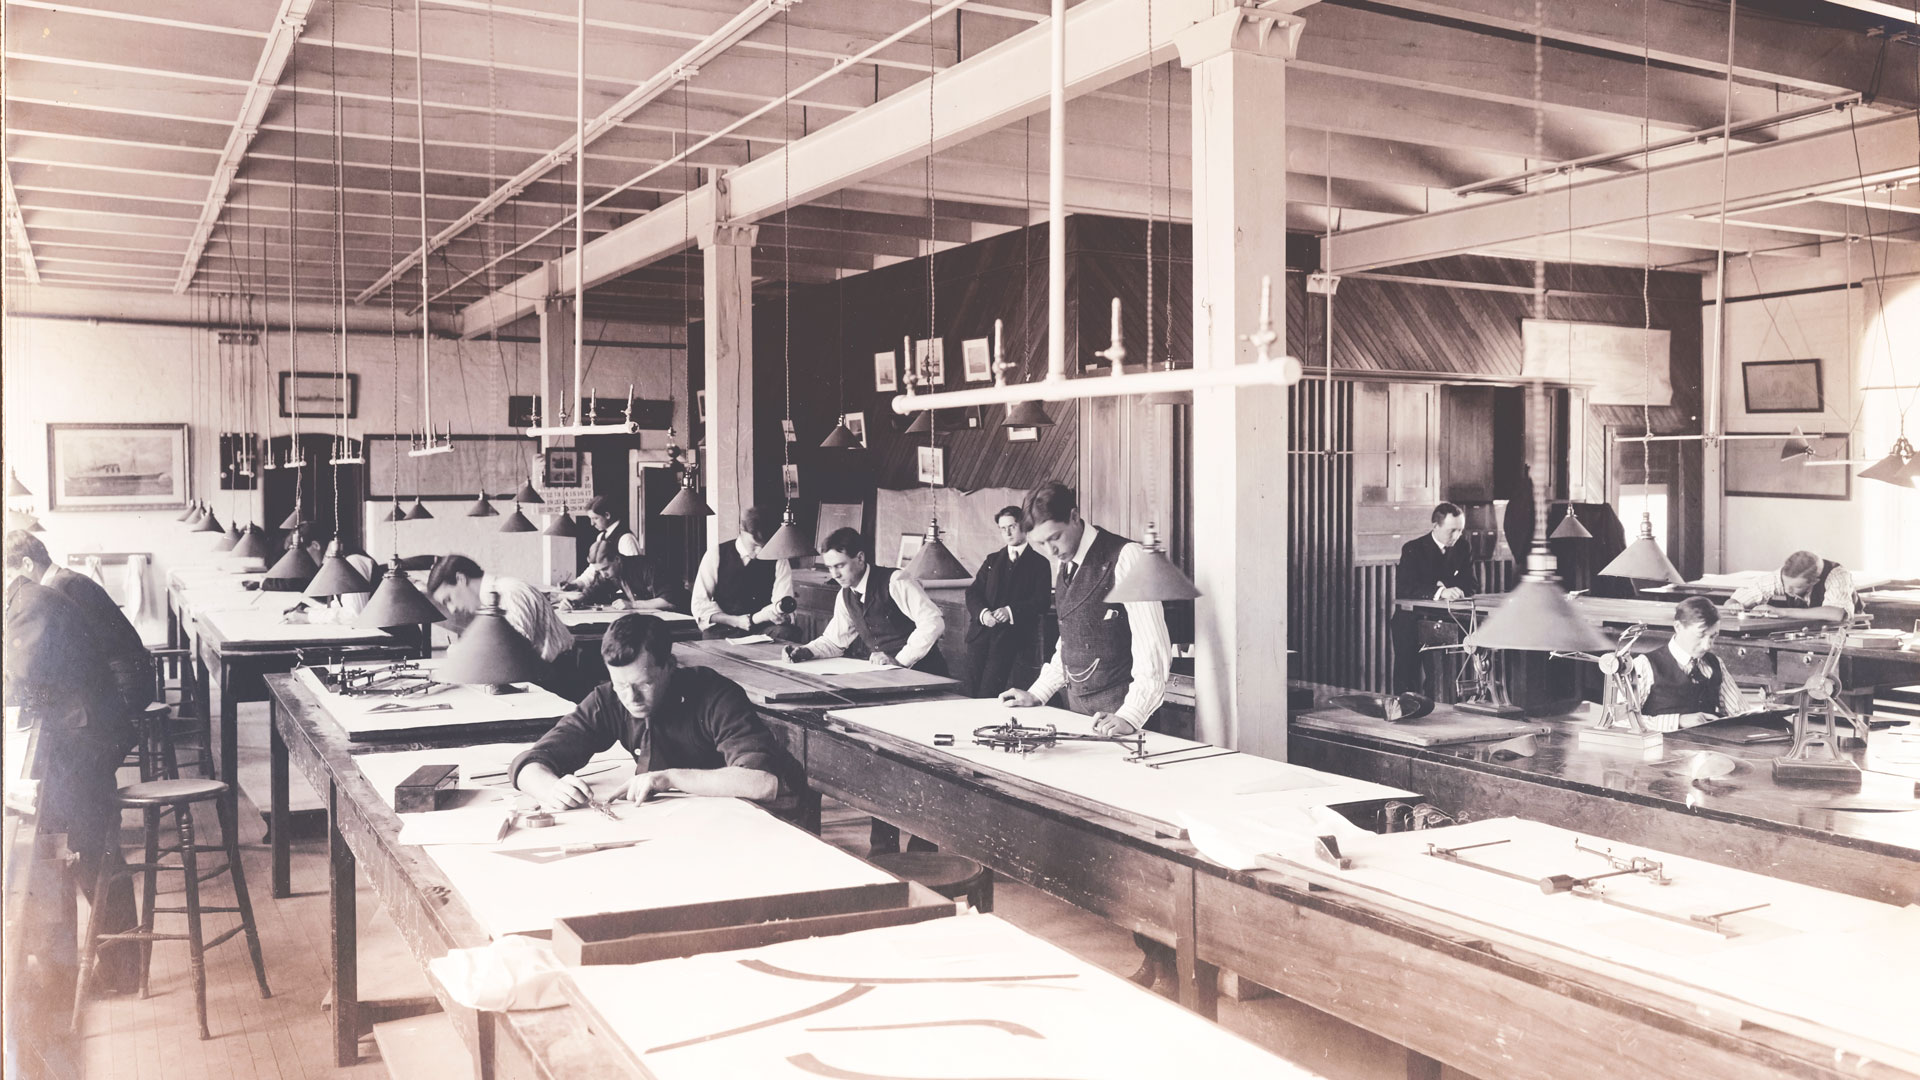 A mechanical drawing class in the Sibley School, ca. 1890s